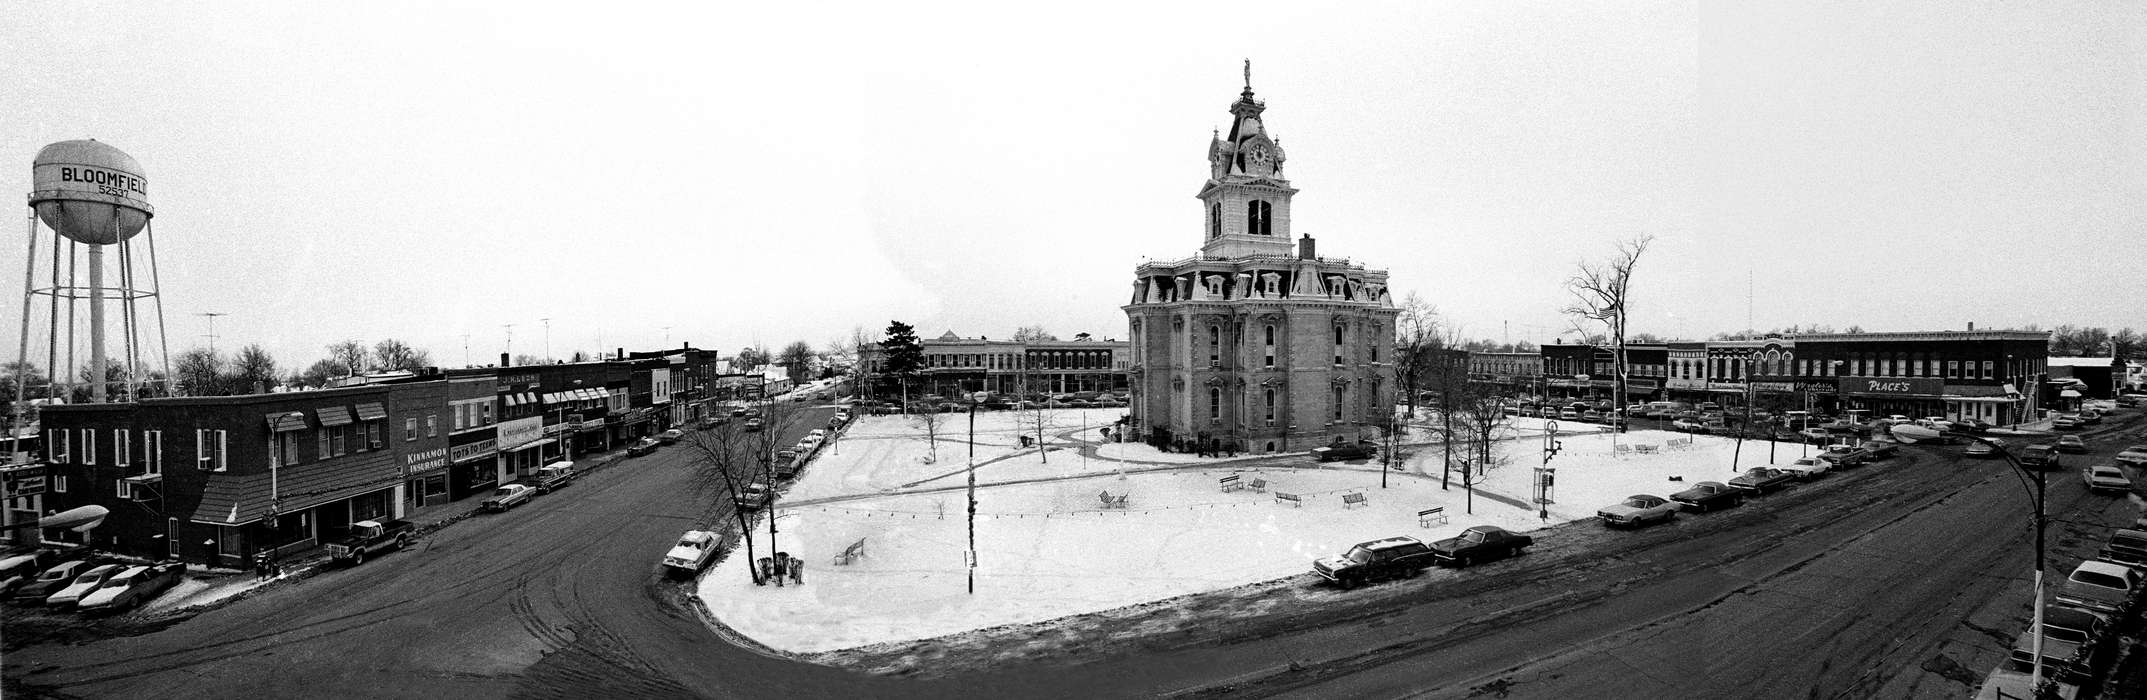 courthouse, snow, Prisons and Criminal Justice, Main Streets & Town Squares, car, Iowa History, park bench, Winter, Cities and Towns, Iowa, christmas decorations, history of Iowa, Bloomfield, IA, Motorized Vehicles, storefront, clock, Lemberger, LeAnn, store, town square, park, tower, water tower, Businesses and Factories, Aerial Shots